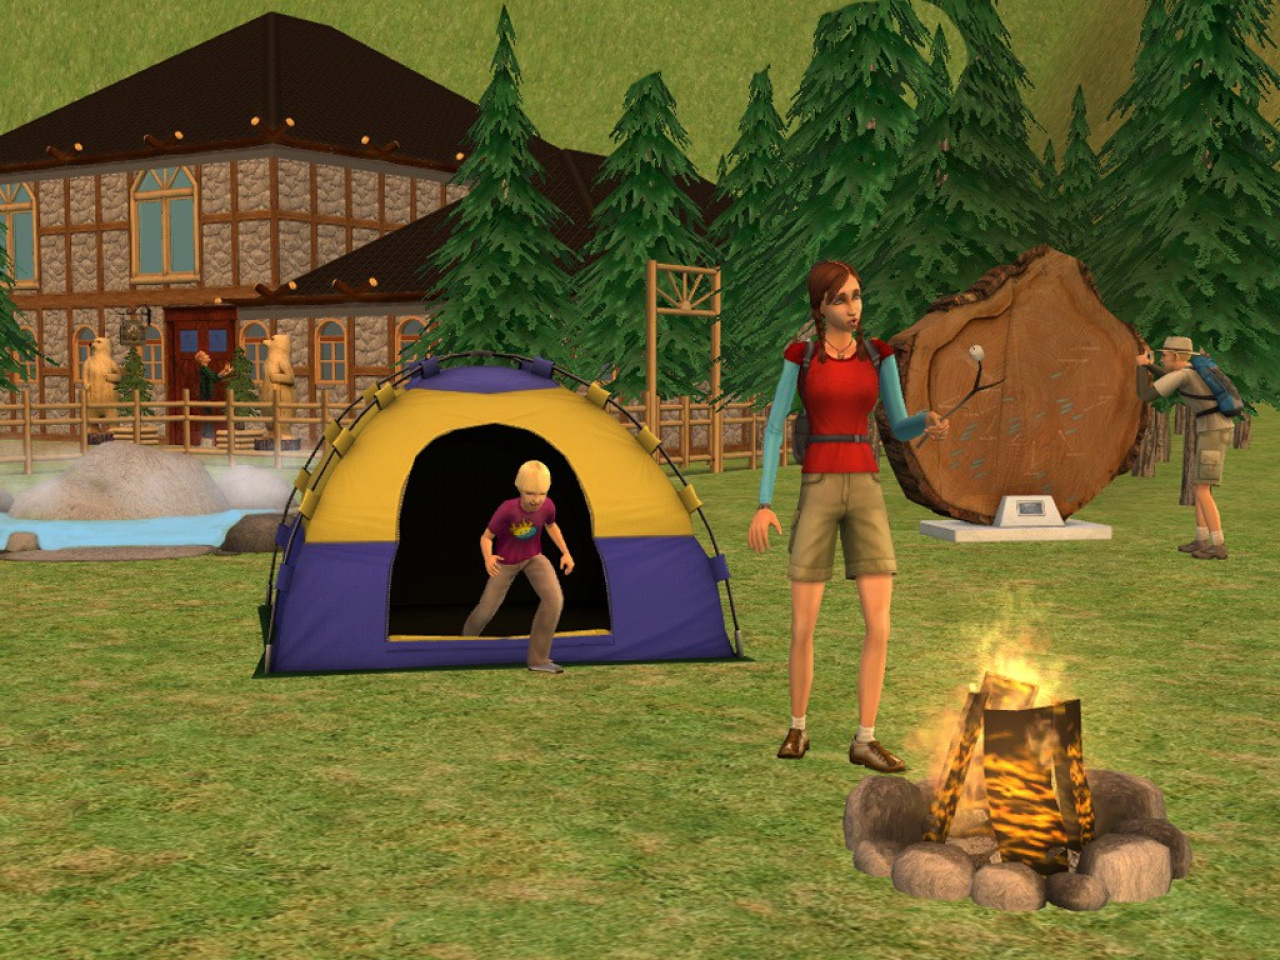 Game sims 2. The SIMS 2 путешествия. Игра SIMS 2 bon Voyage. The SIMS 2 Бон Вояж. The SIMS 2 2004.